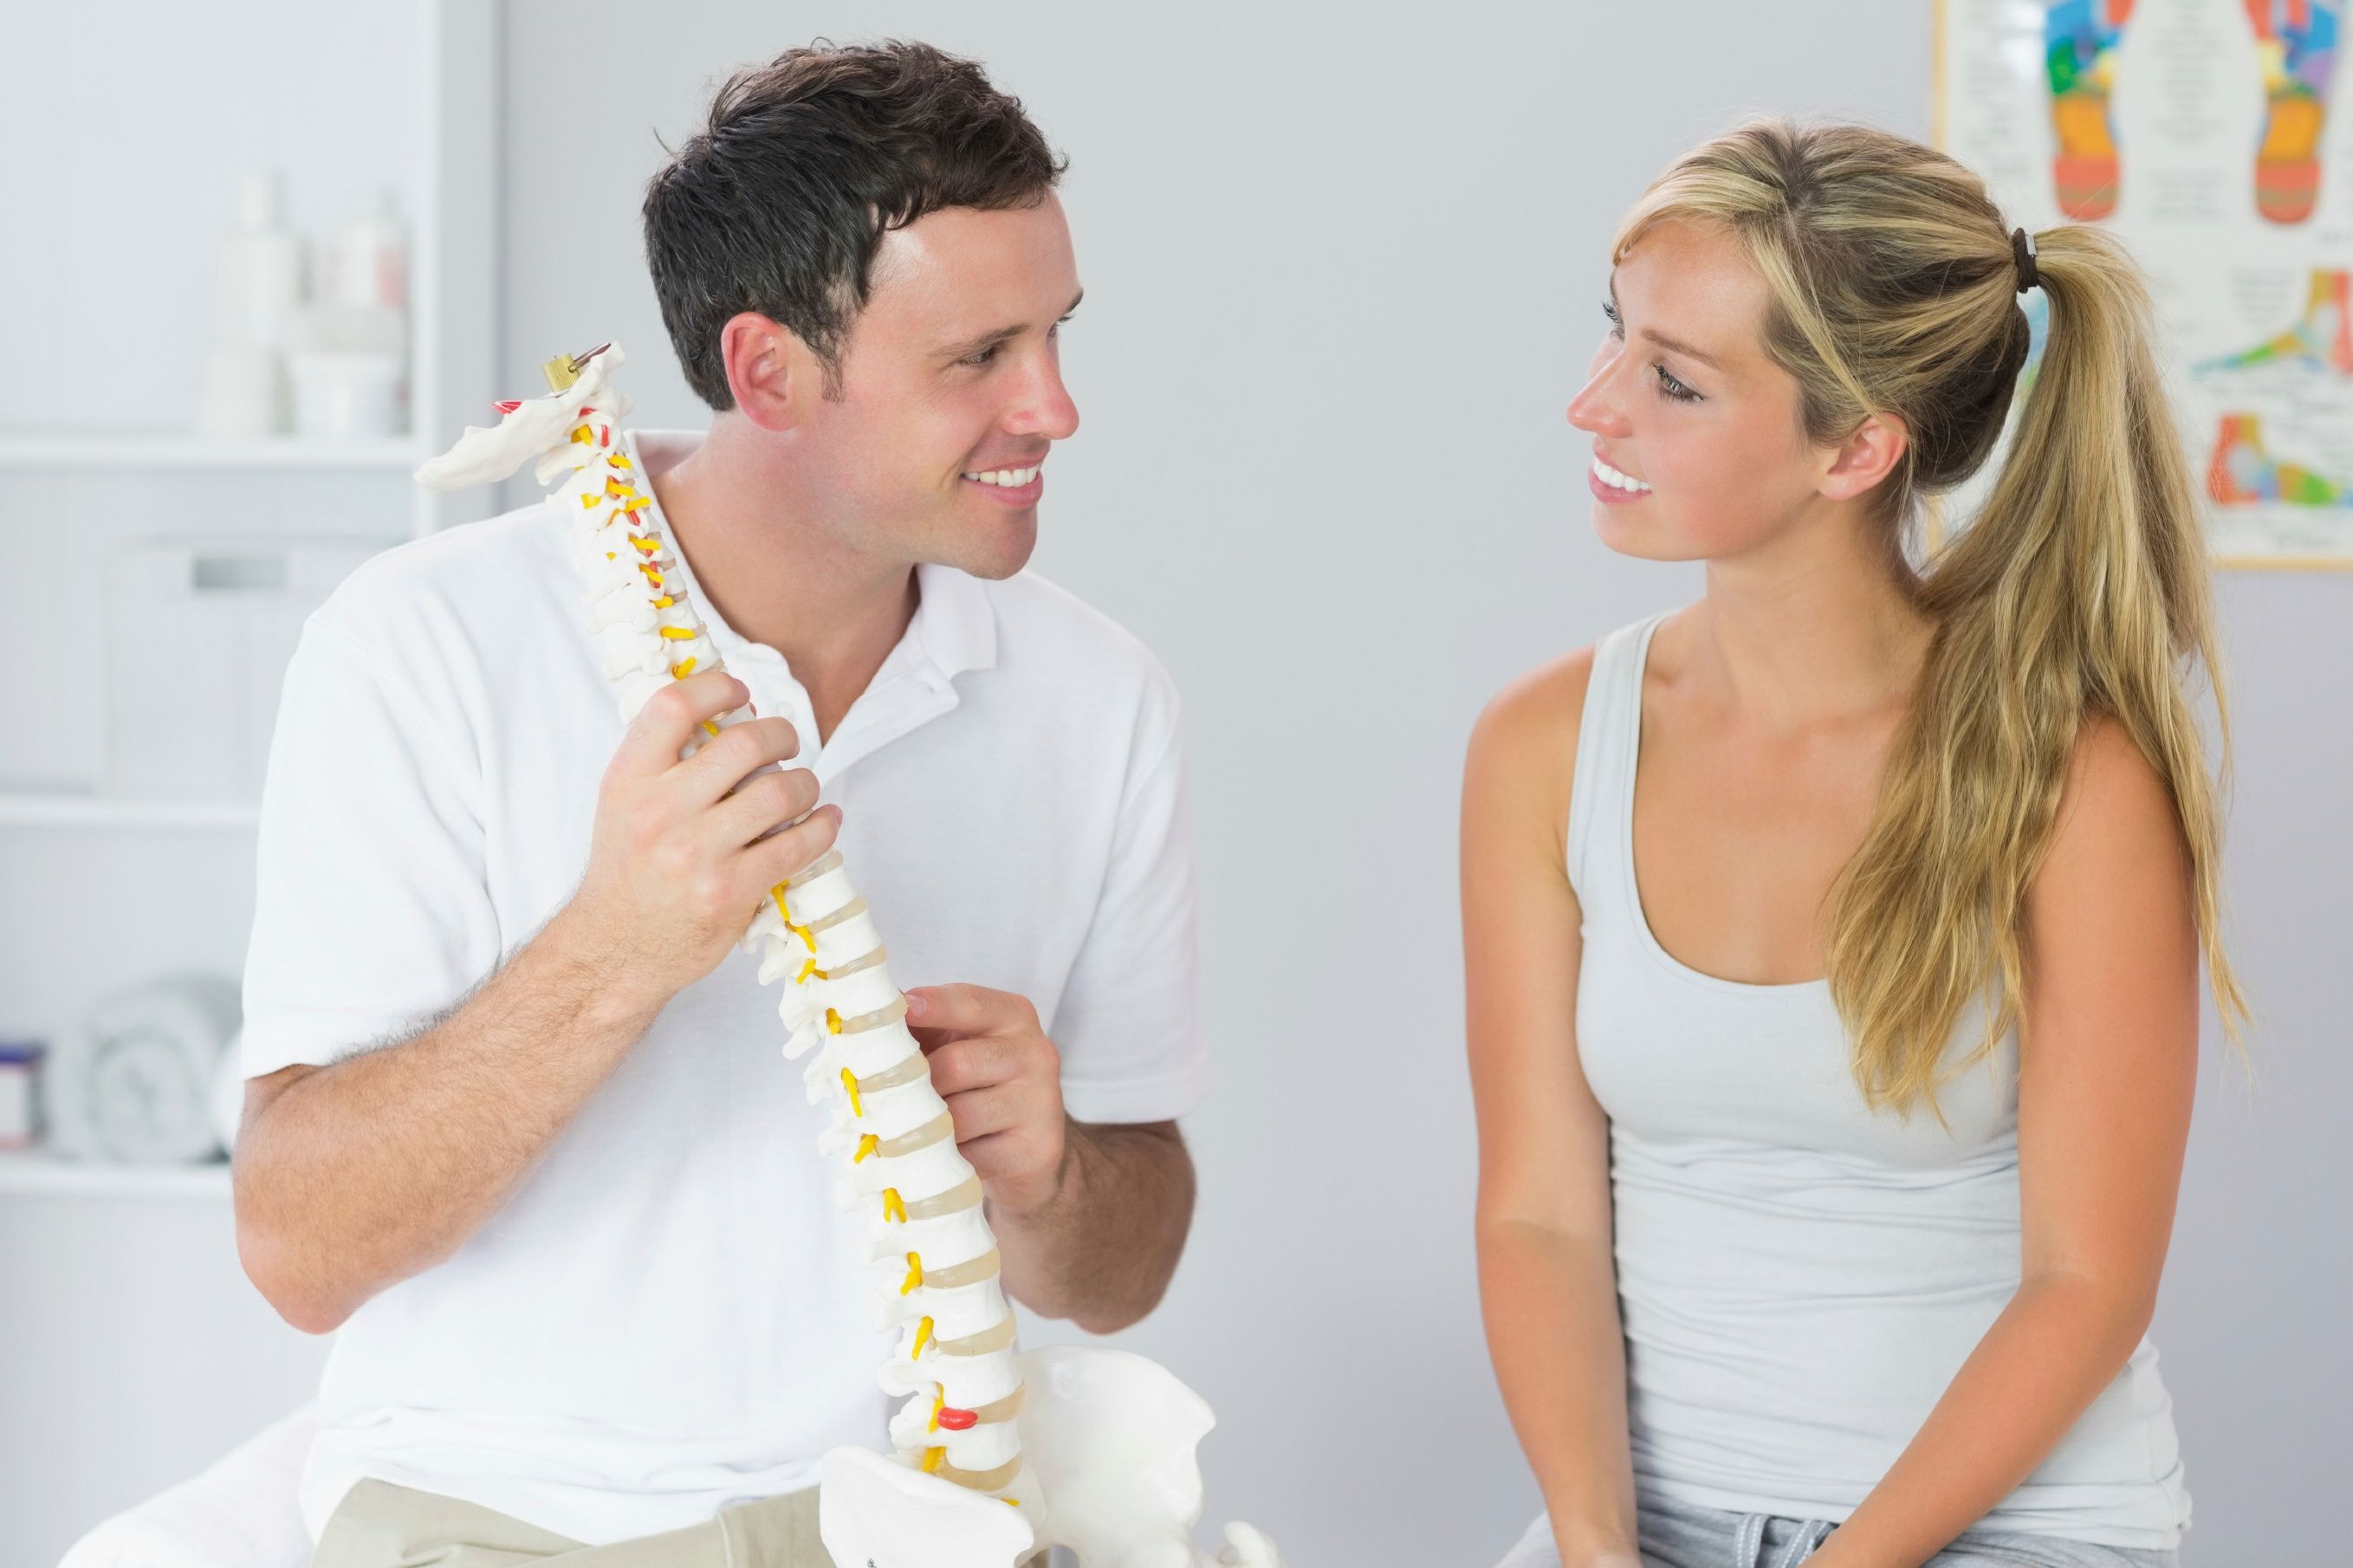 Getting the most out of your chiropractic care